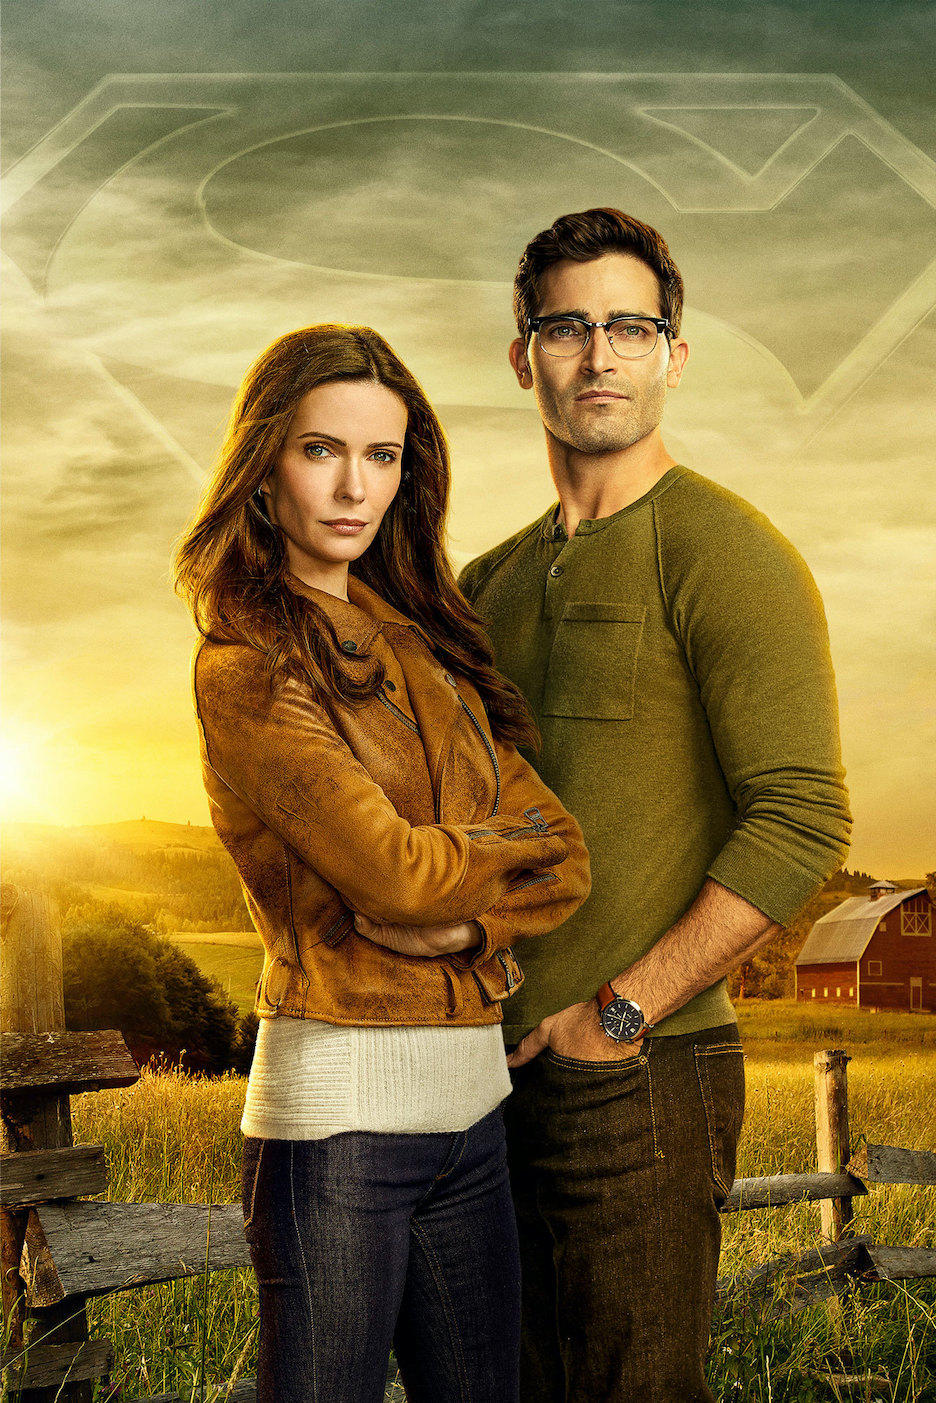 `Superman & Lois`: Pictured, from left, at Bitsie Tulloch as Lois Lane and Tyler Hoechlin as Clark Kent. (The CW photo by Nino Muñoz/©2020 The CW Network LLC; all rights reserved)